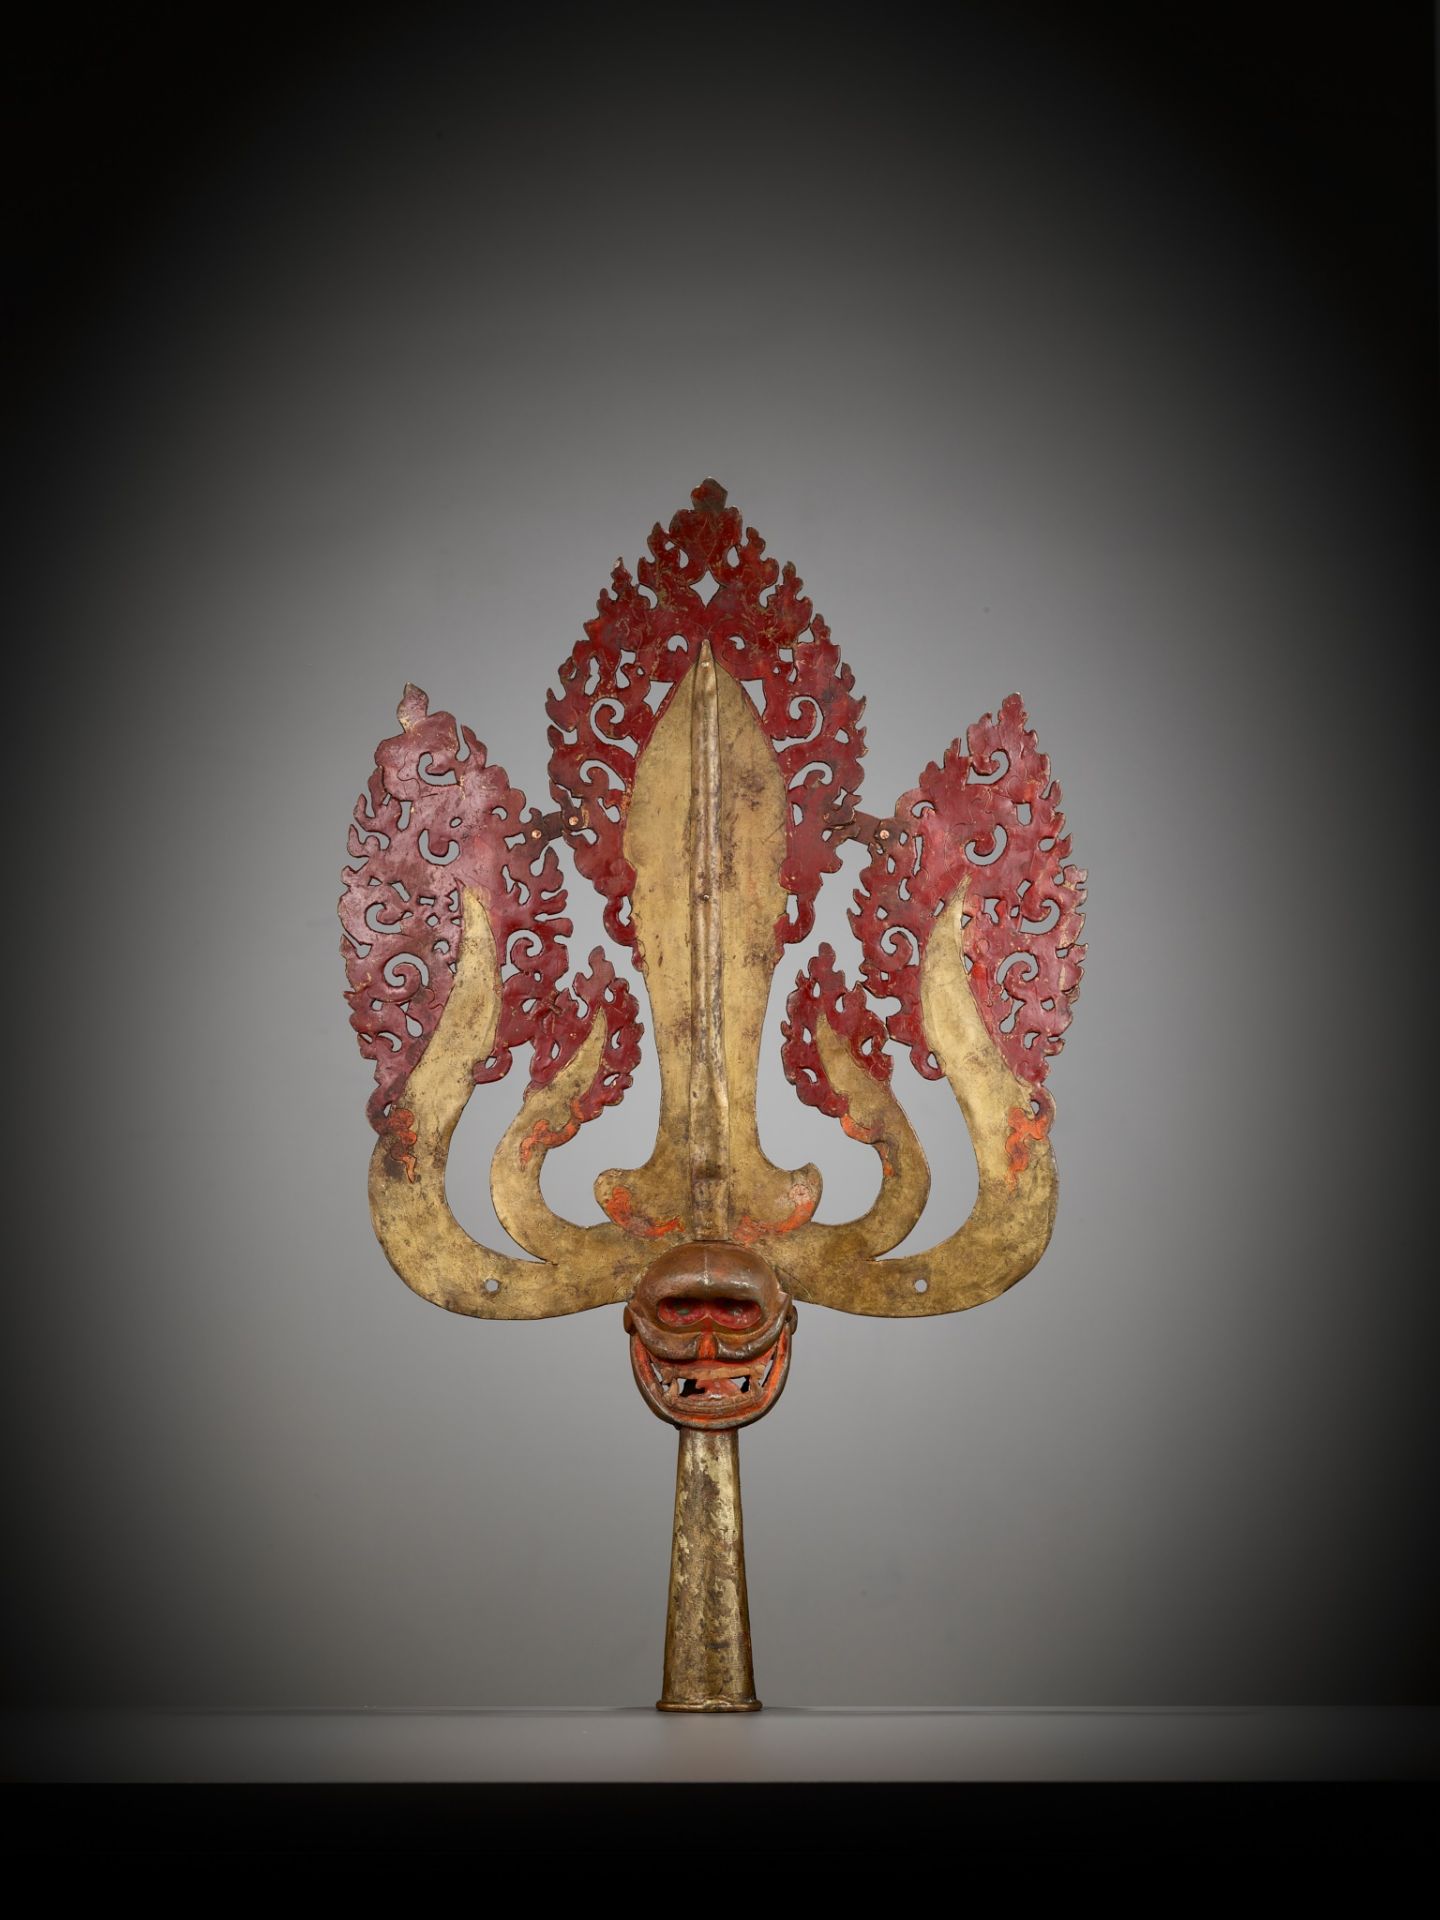 A LARGE LACQUERED AND GILT COPPER-ALLOY TRISHULA FITTING, TIBET, 17TH - 18TH CENTURY - Image 10 of 12